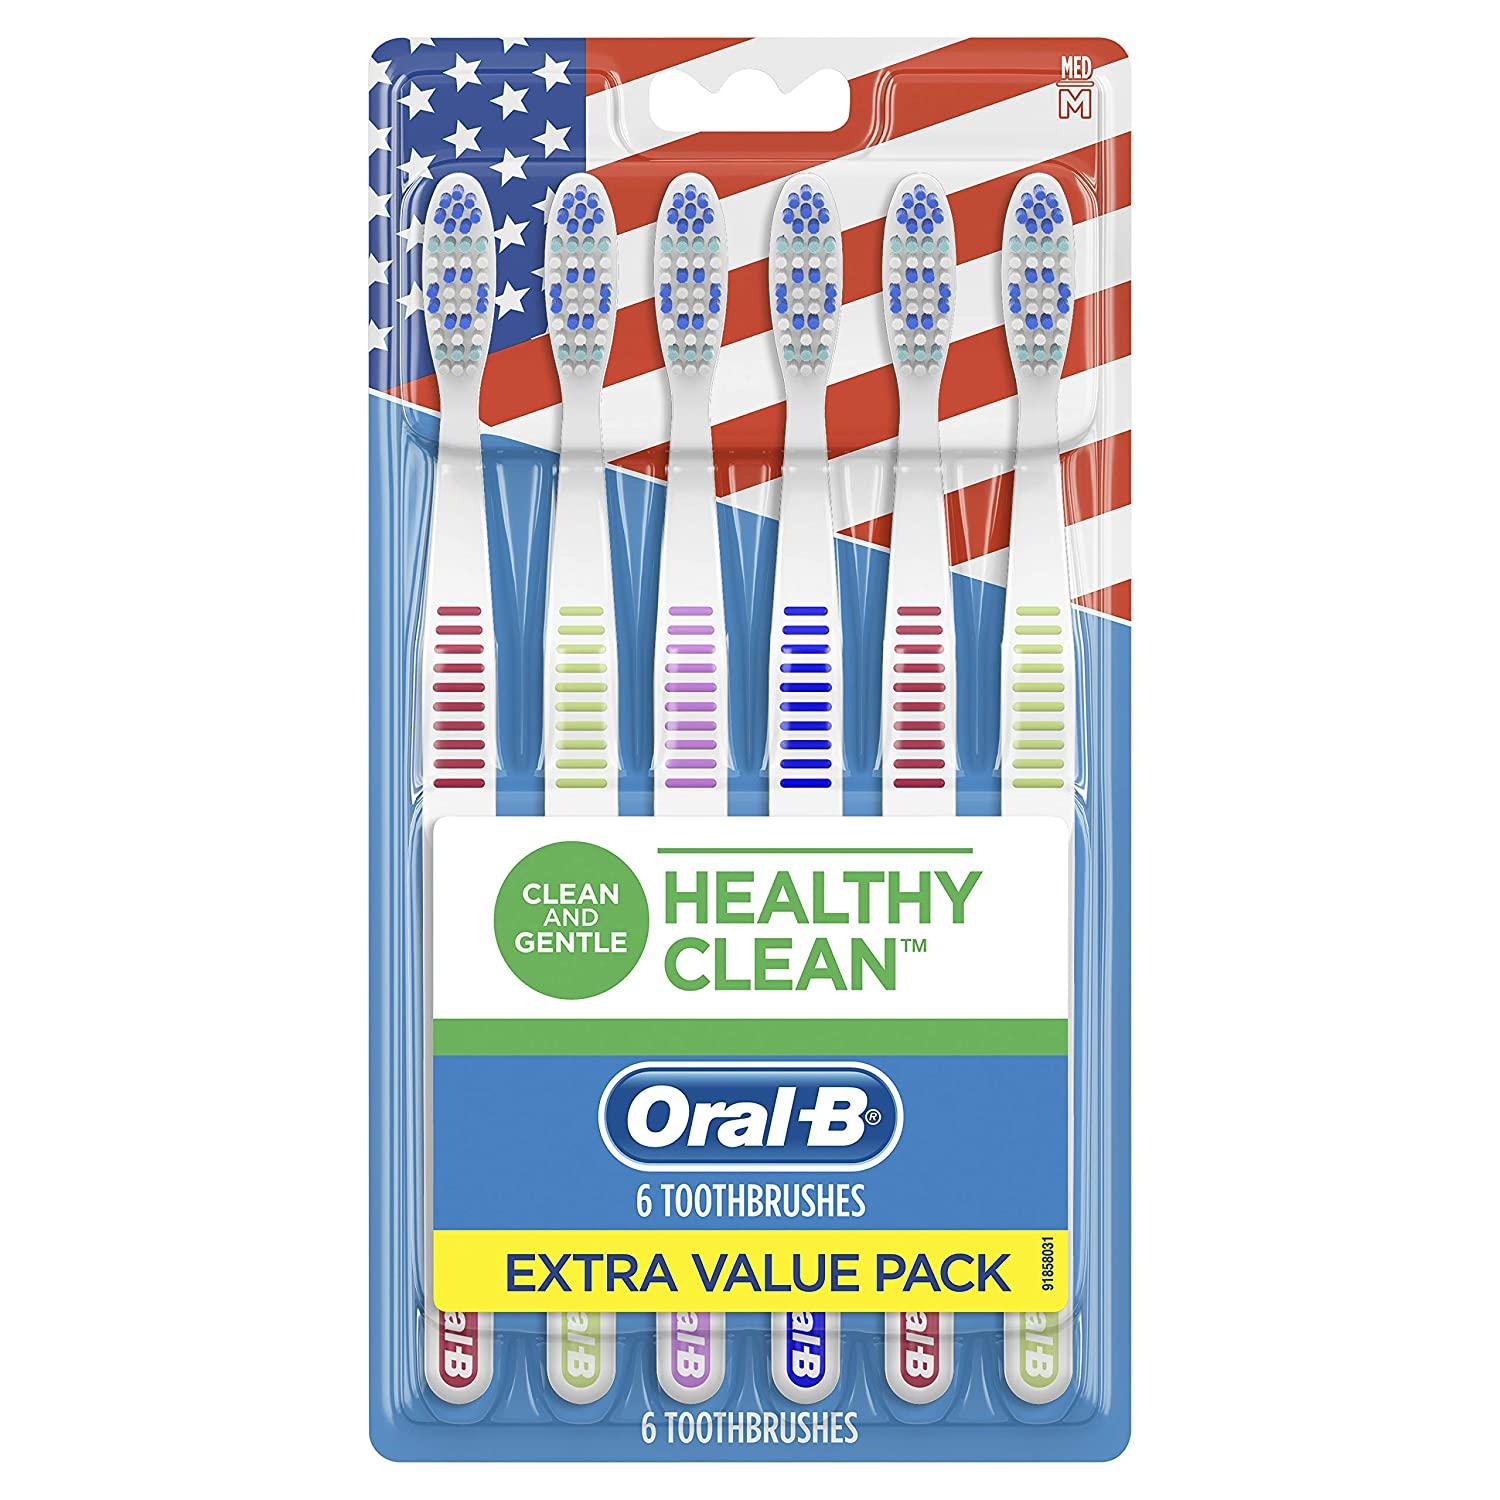 18 Oral-b Healthy Clean Toothbrushes for $9.22 Shipped